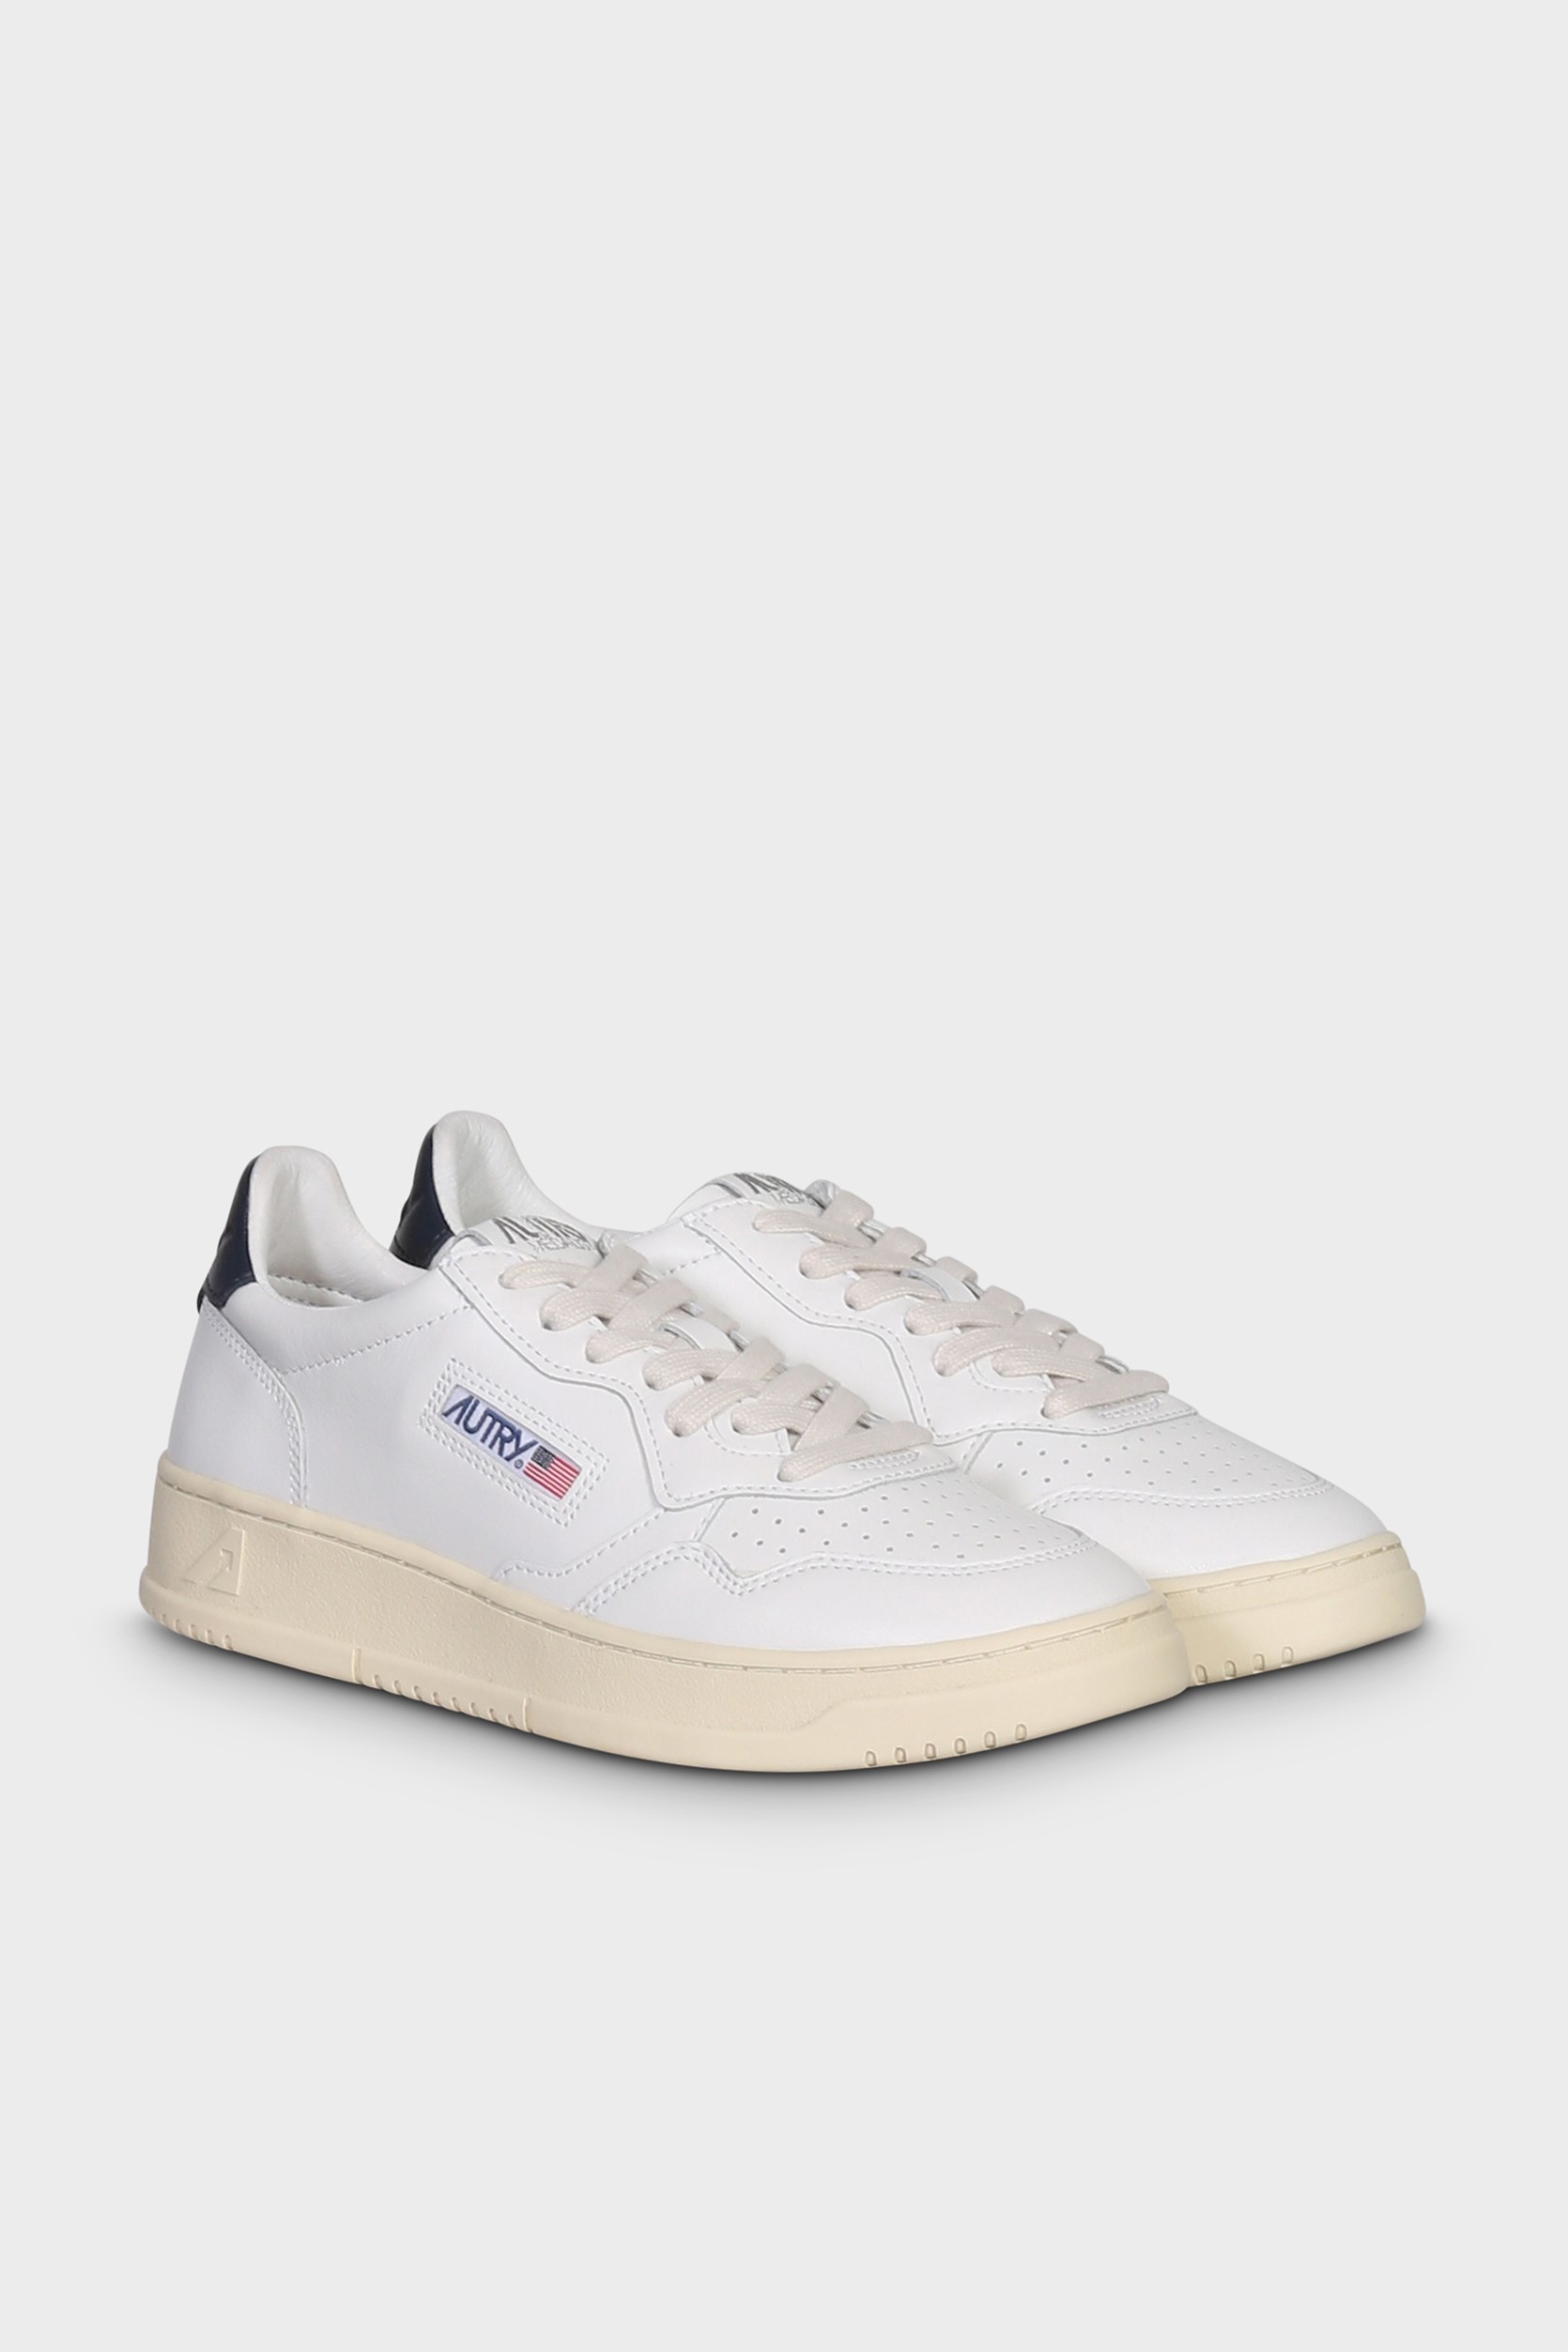 AUTRY ACTION SHOES Medalist Low Sneaker White/Space 40